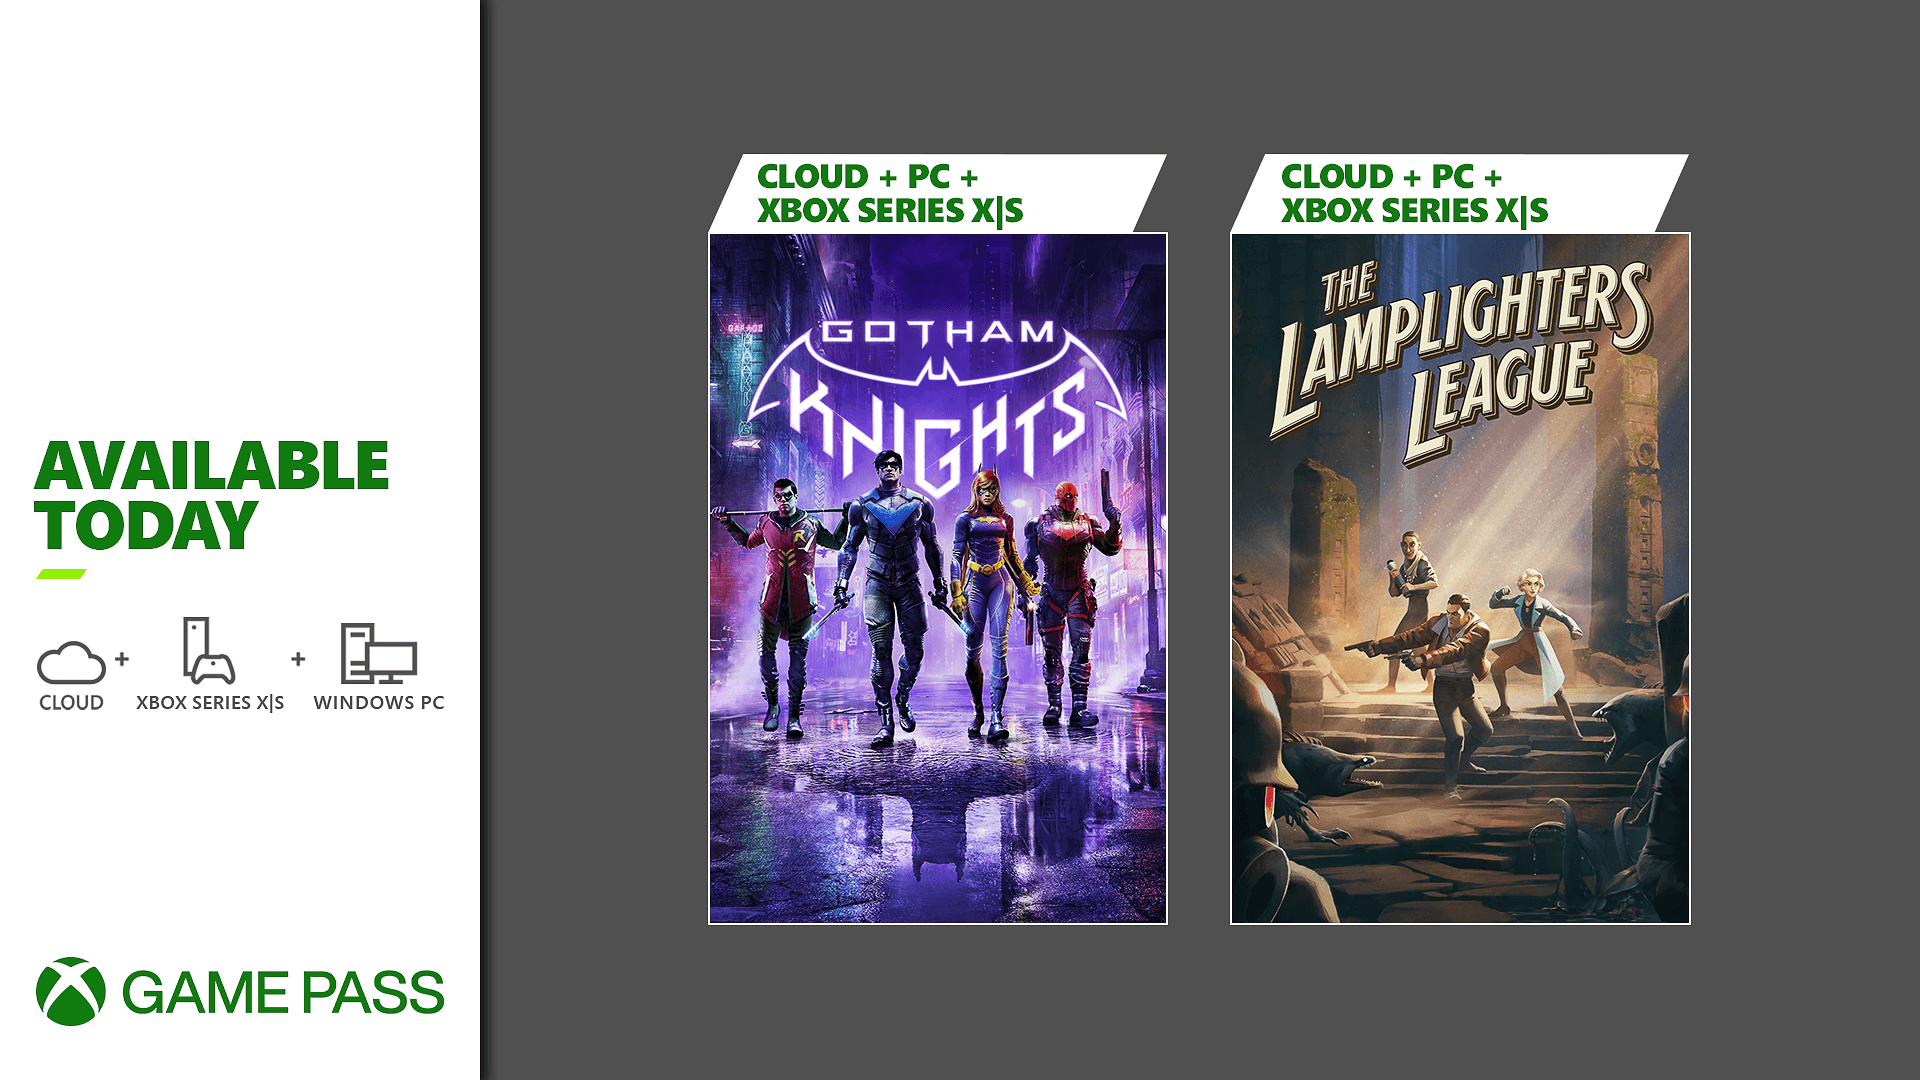 Is Gotham Knights Coming to Xbox Game Pass?